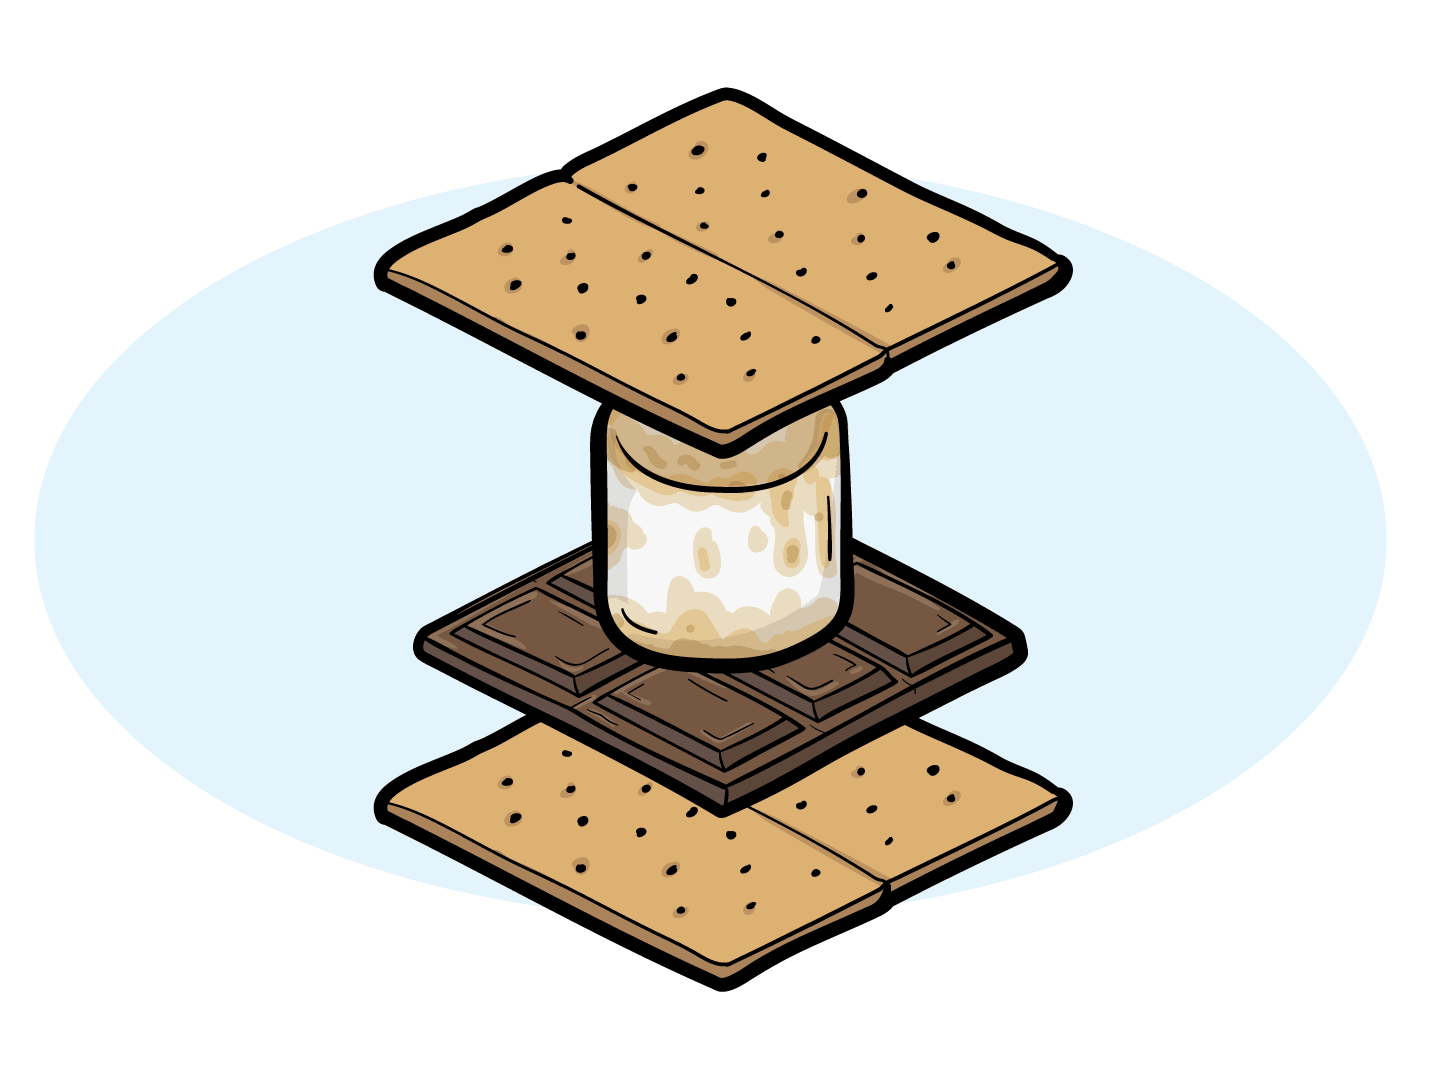 GIF of a S'more coming together